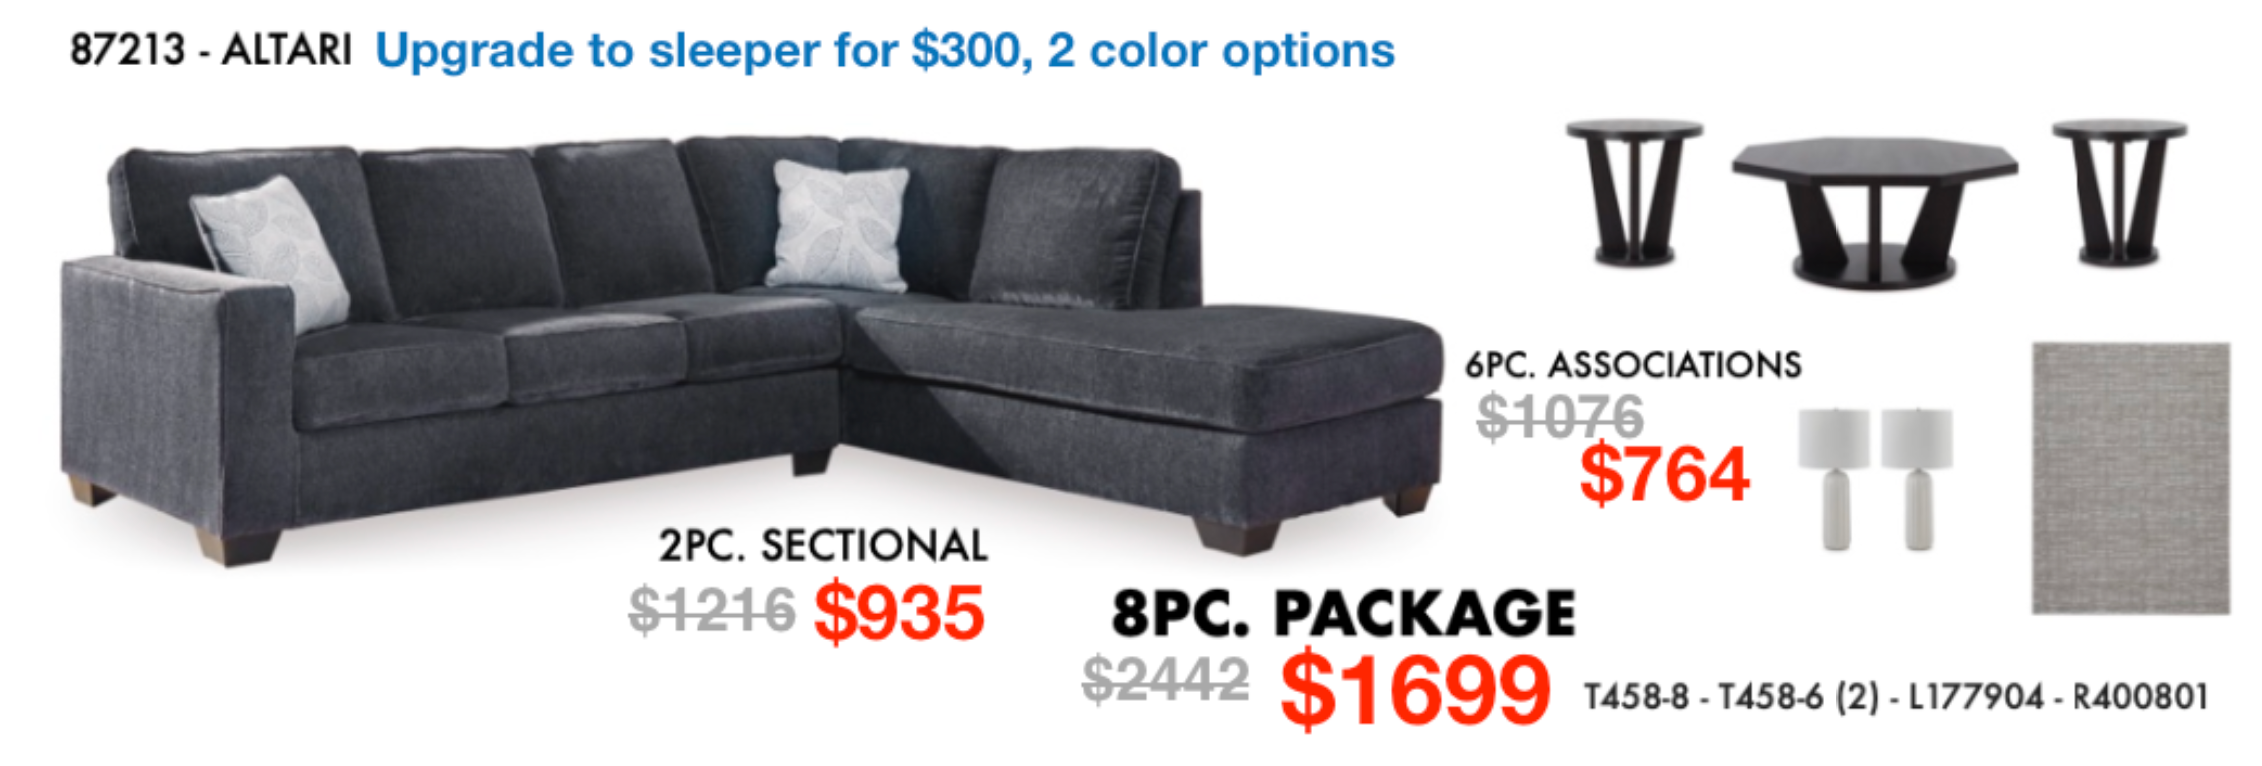 Altari Sectional Tax Time Sale